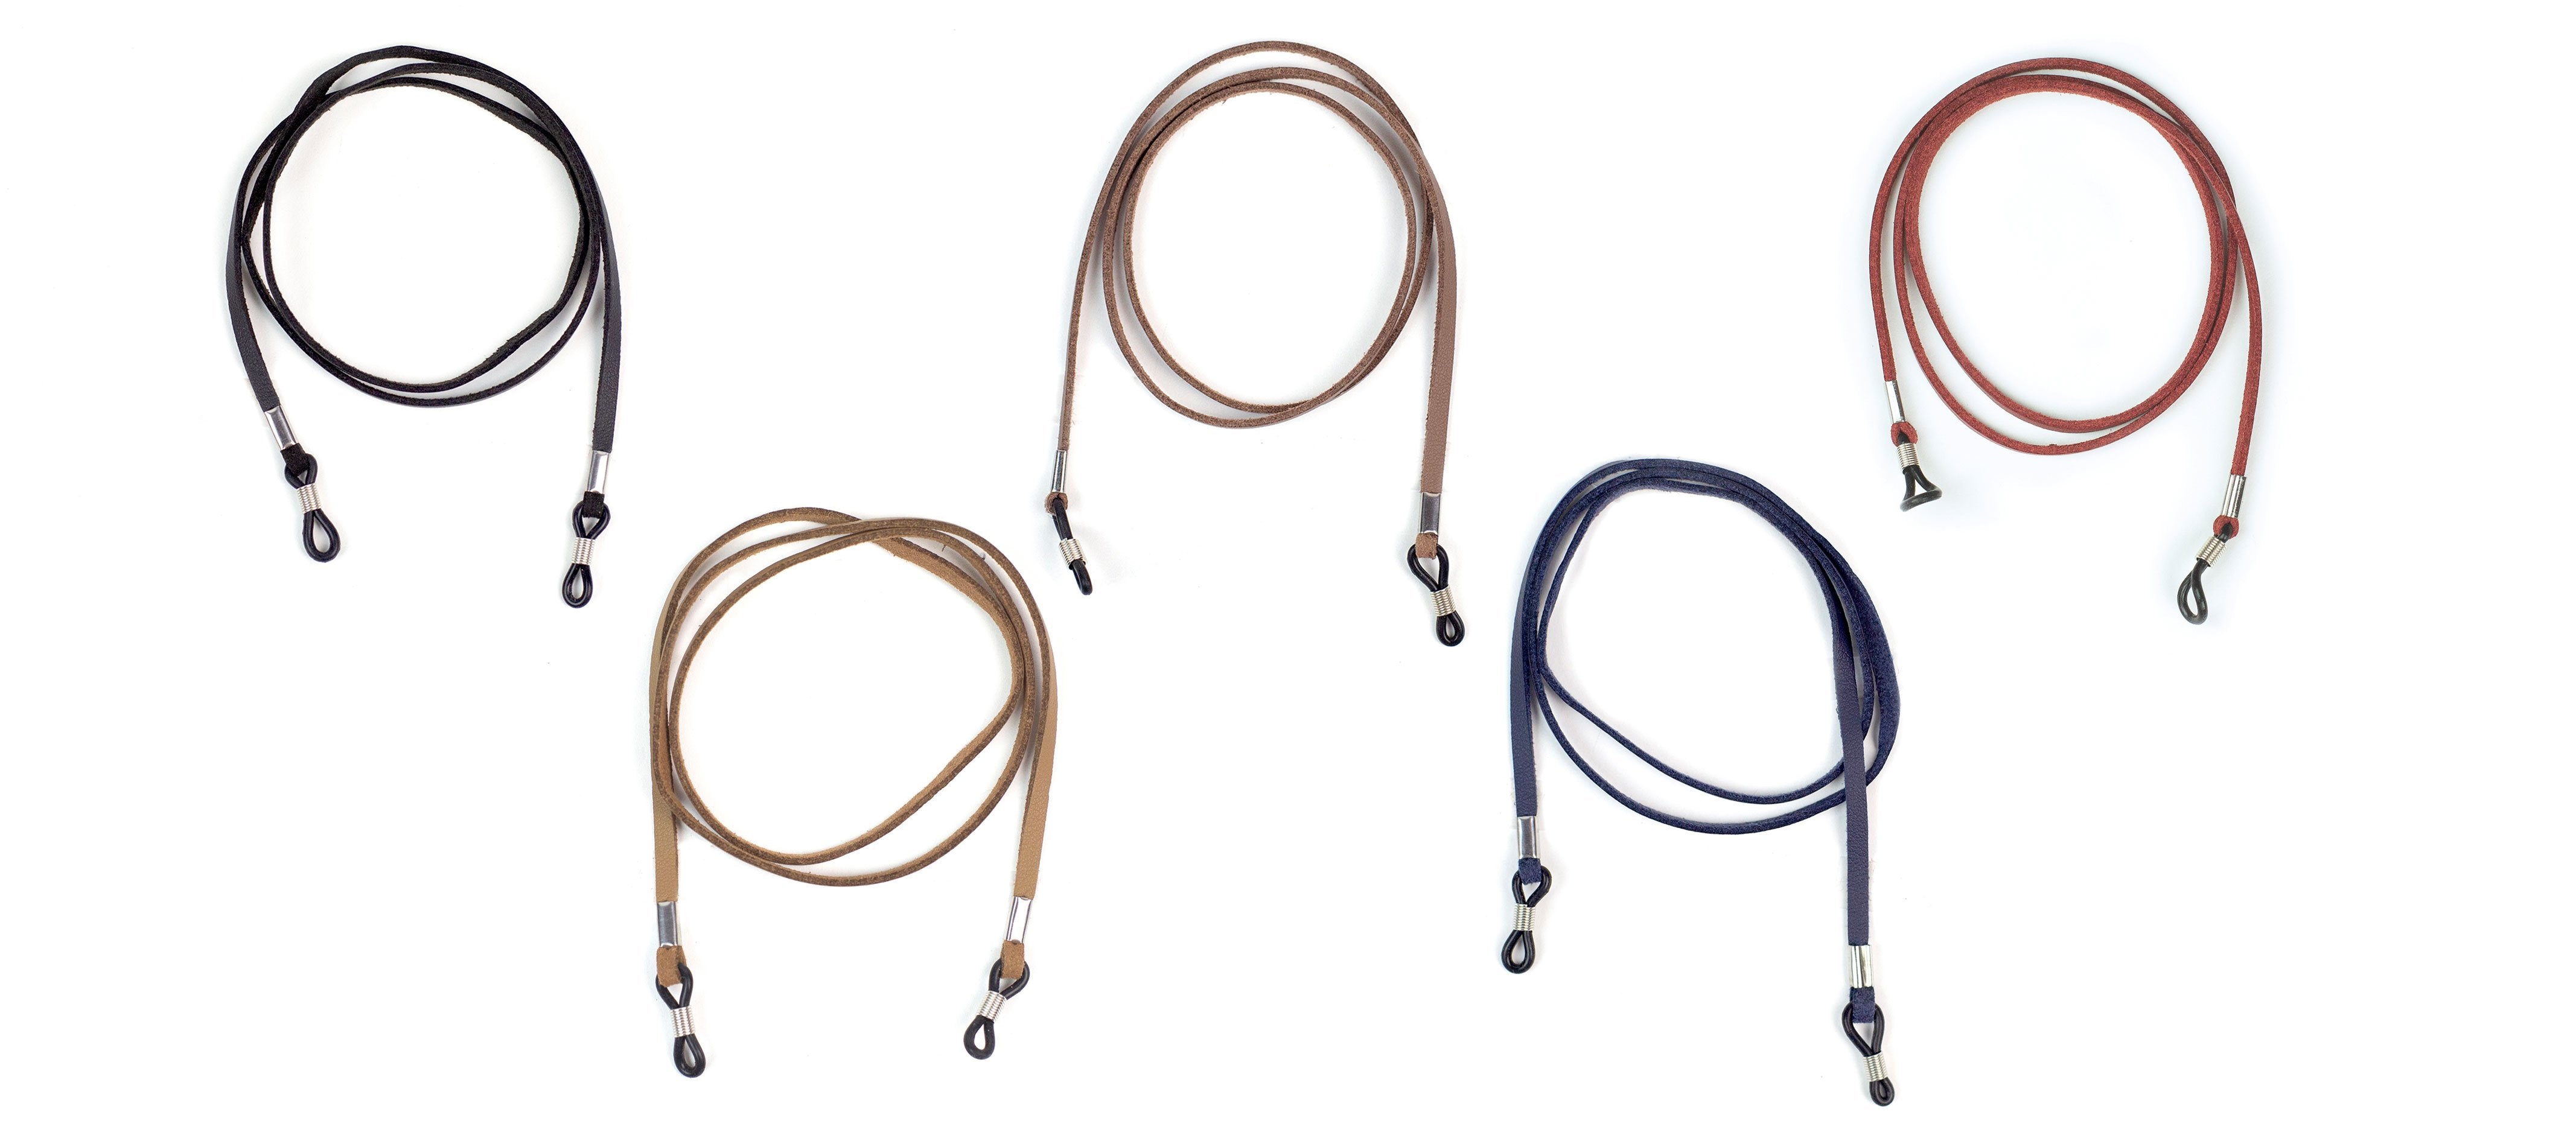 Peepers faux leather cords for reading glasses